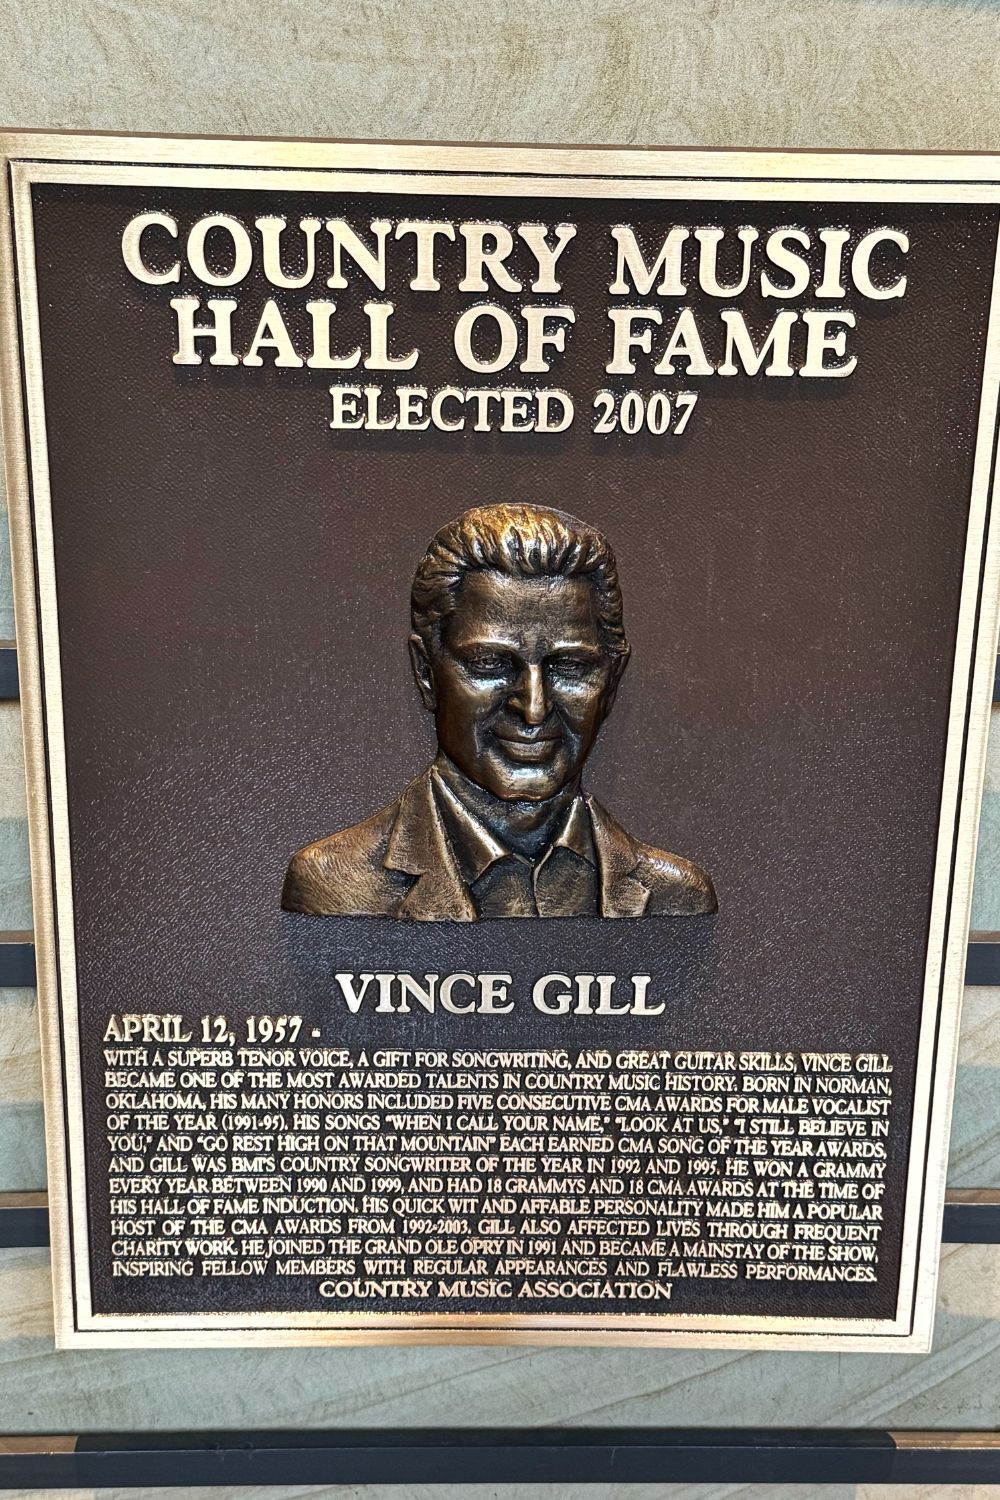 Vince Gill, Country Music Hall of Fame